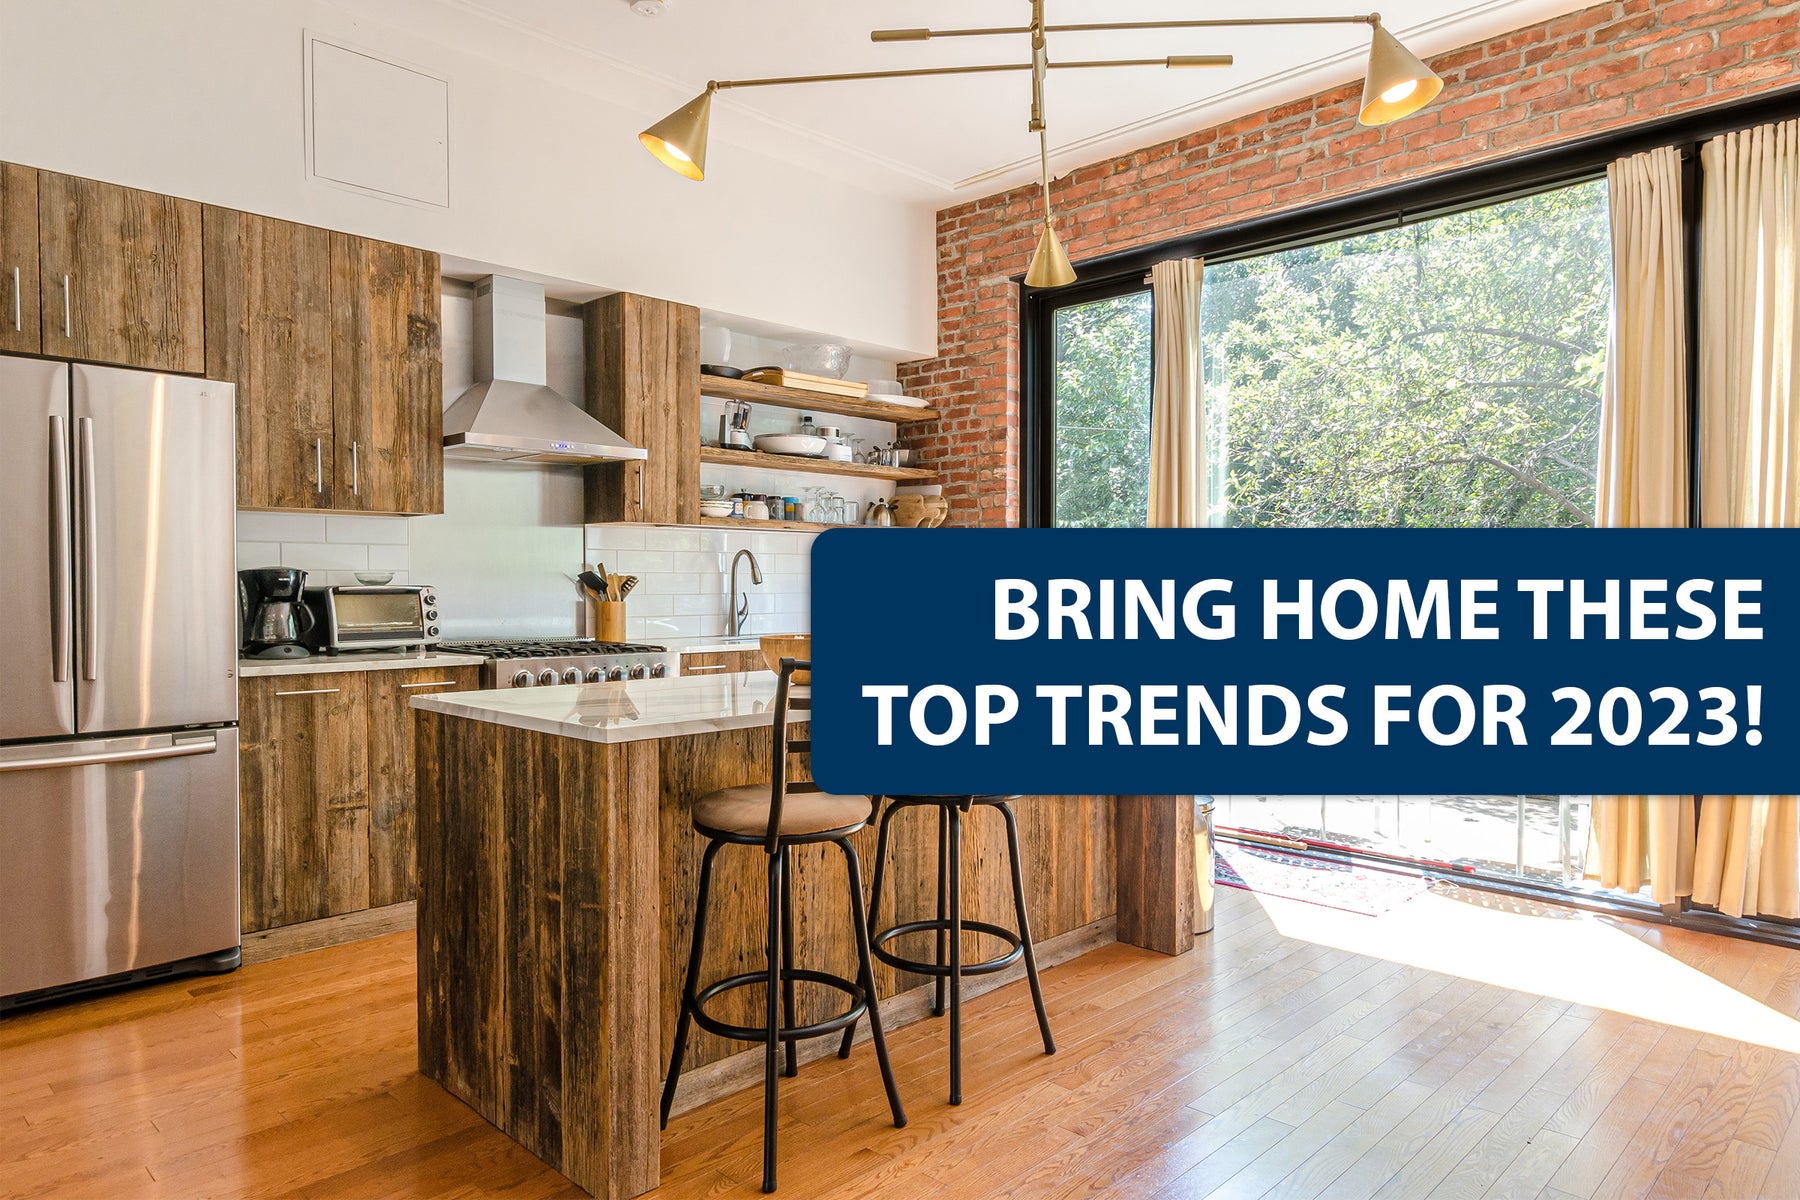 Top Home Hardware Trends for 2023